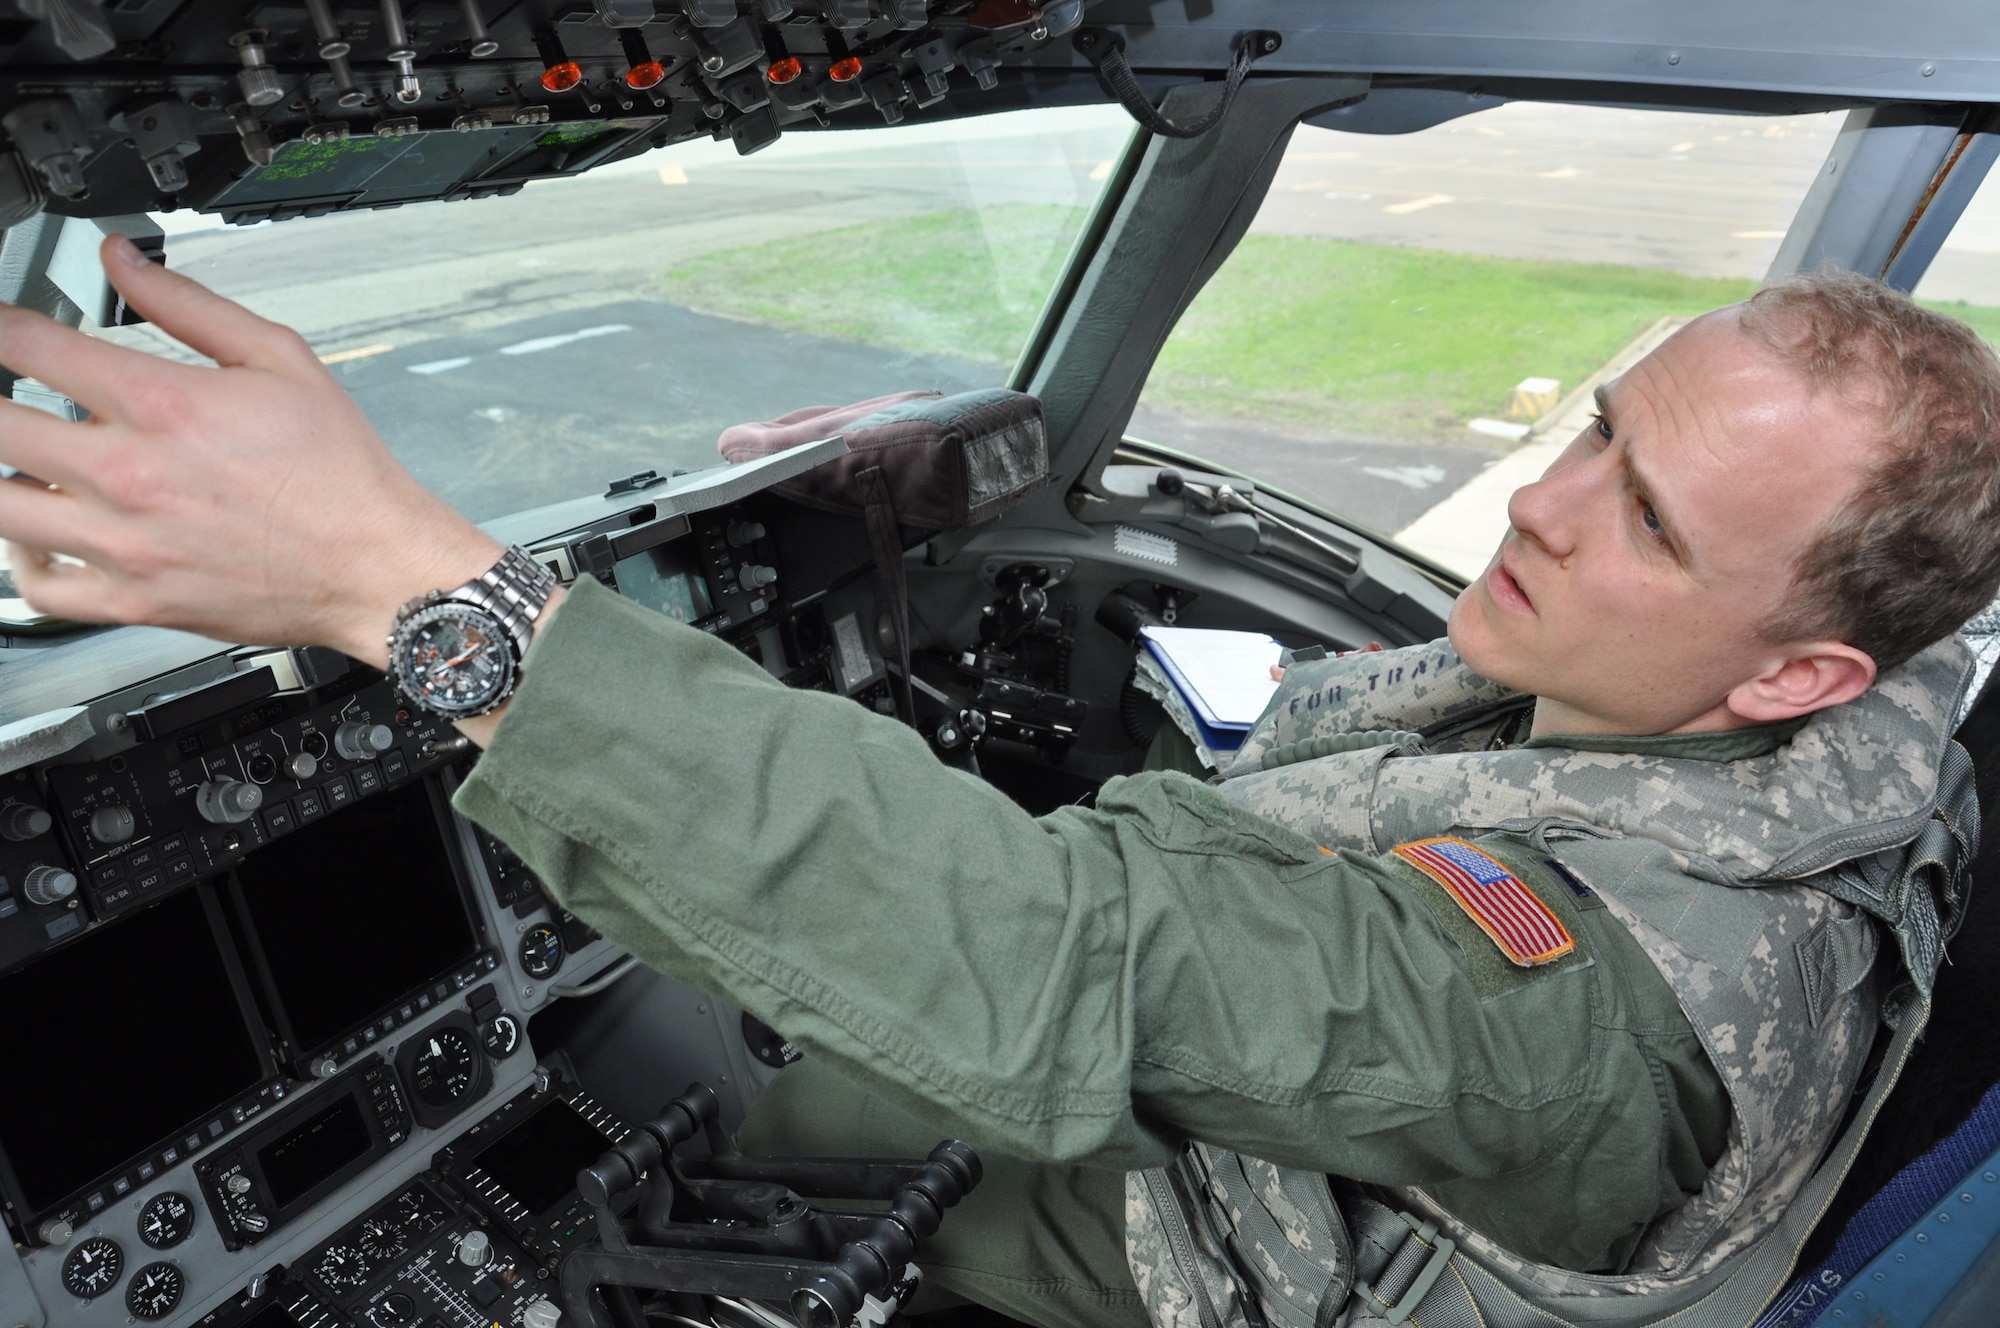 Capt. Eric Deist, 21st Airlift Squadron pilot, reaches for the control panel while wearing an integrated aircrew body armor system to assess movement restrictions during pre-flight checks aboard a C-17 Globemaster III March 4 on the flightline. Diest said that after performing the tests and evaluations of the program, he understands the value of testing the equipment. (U.S. Air Force photo/Staff Sgt. Christopher Carranza)